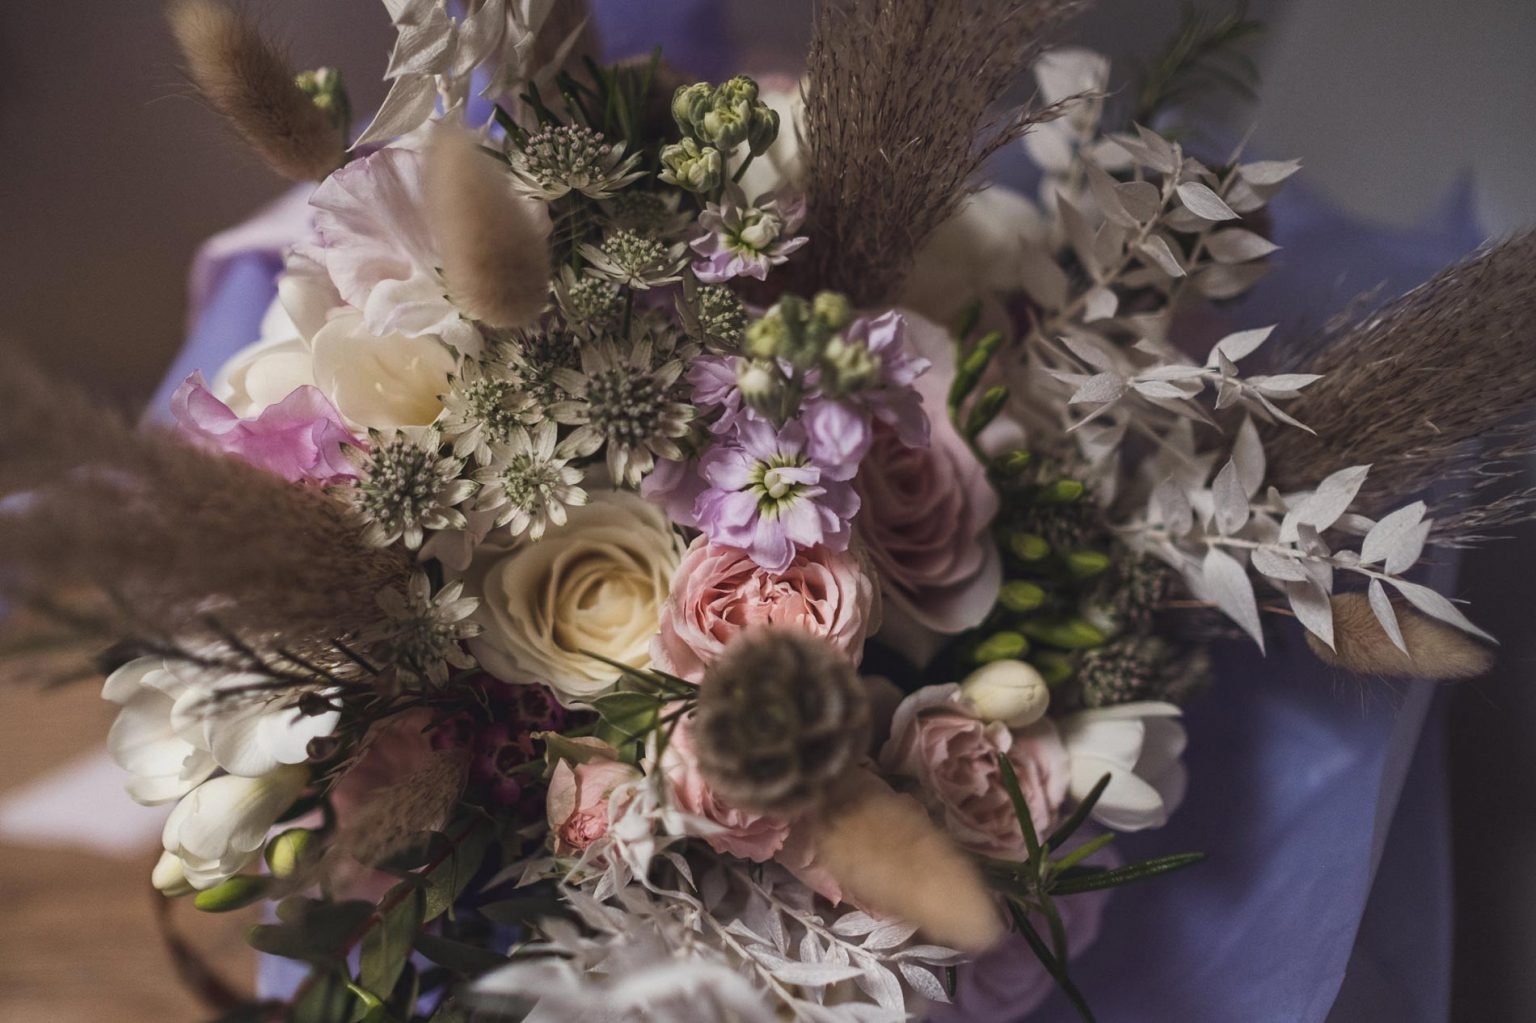  An up close image of a modern bridal bouquet. The pastel pinks and lilacs are alongside white flowers and the various textures, stems and foliage create a contemporary display.     Photo Credit: Steve Fanstone Photography 